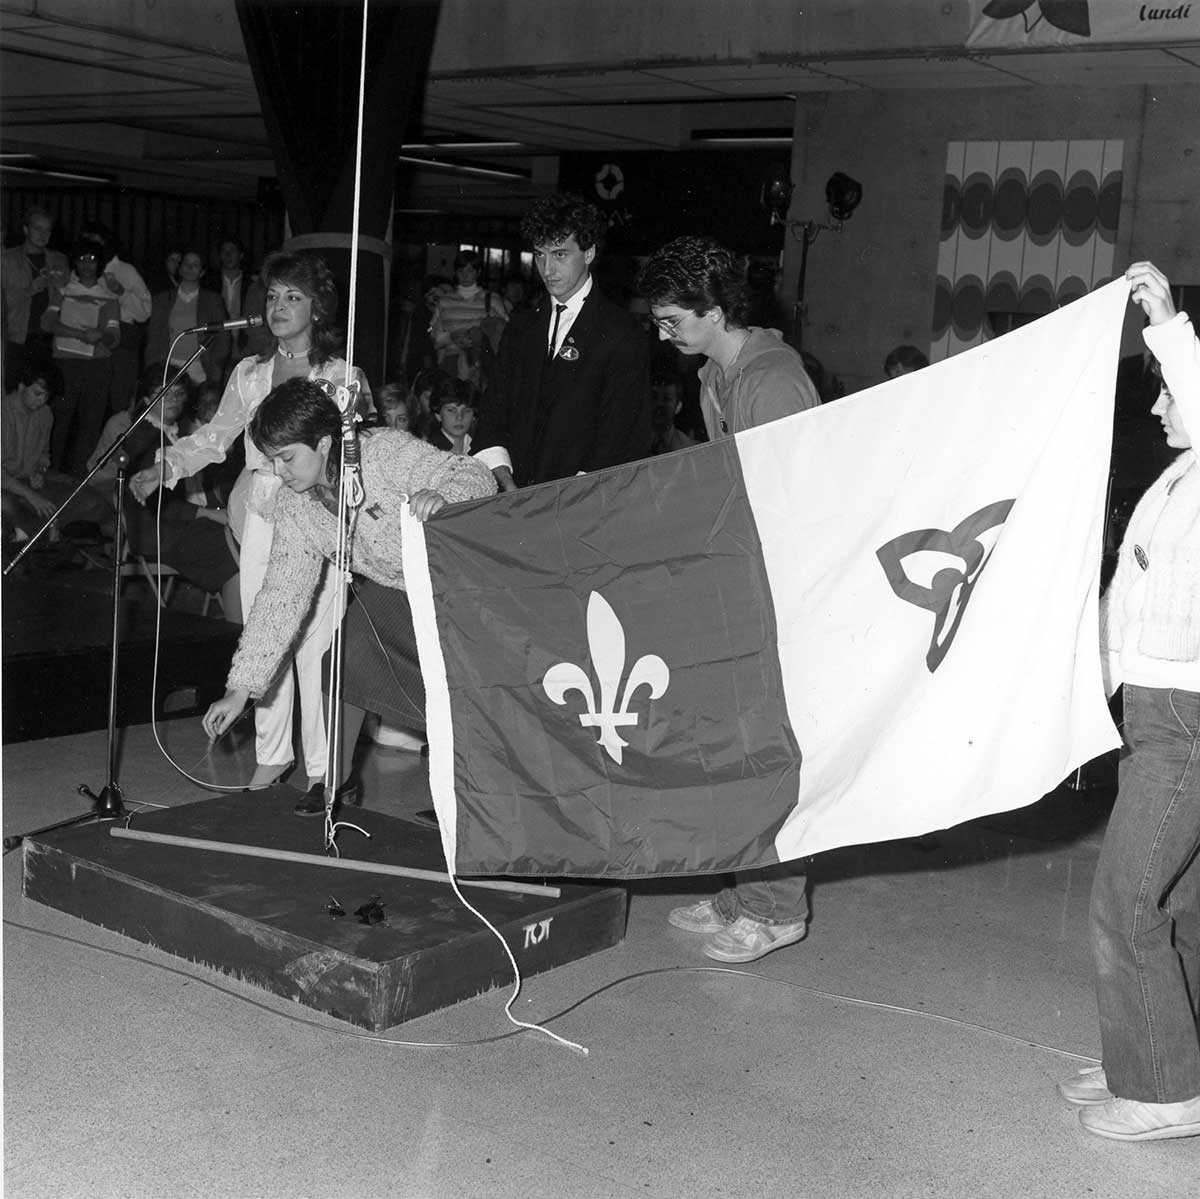 Raising the Franco-Ontarian flag for the first time at the University of Ottawa, 1974. (Archives of the University of Ottawa, AUO-PHO-NB-6-1983-6).